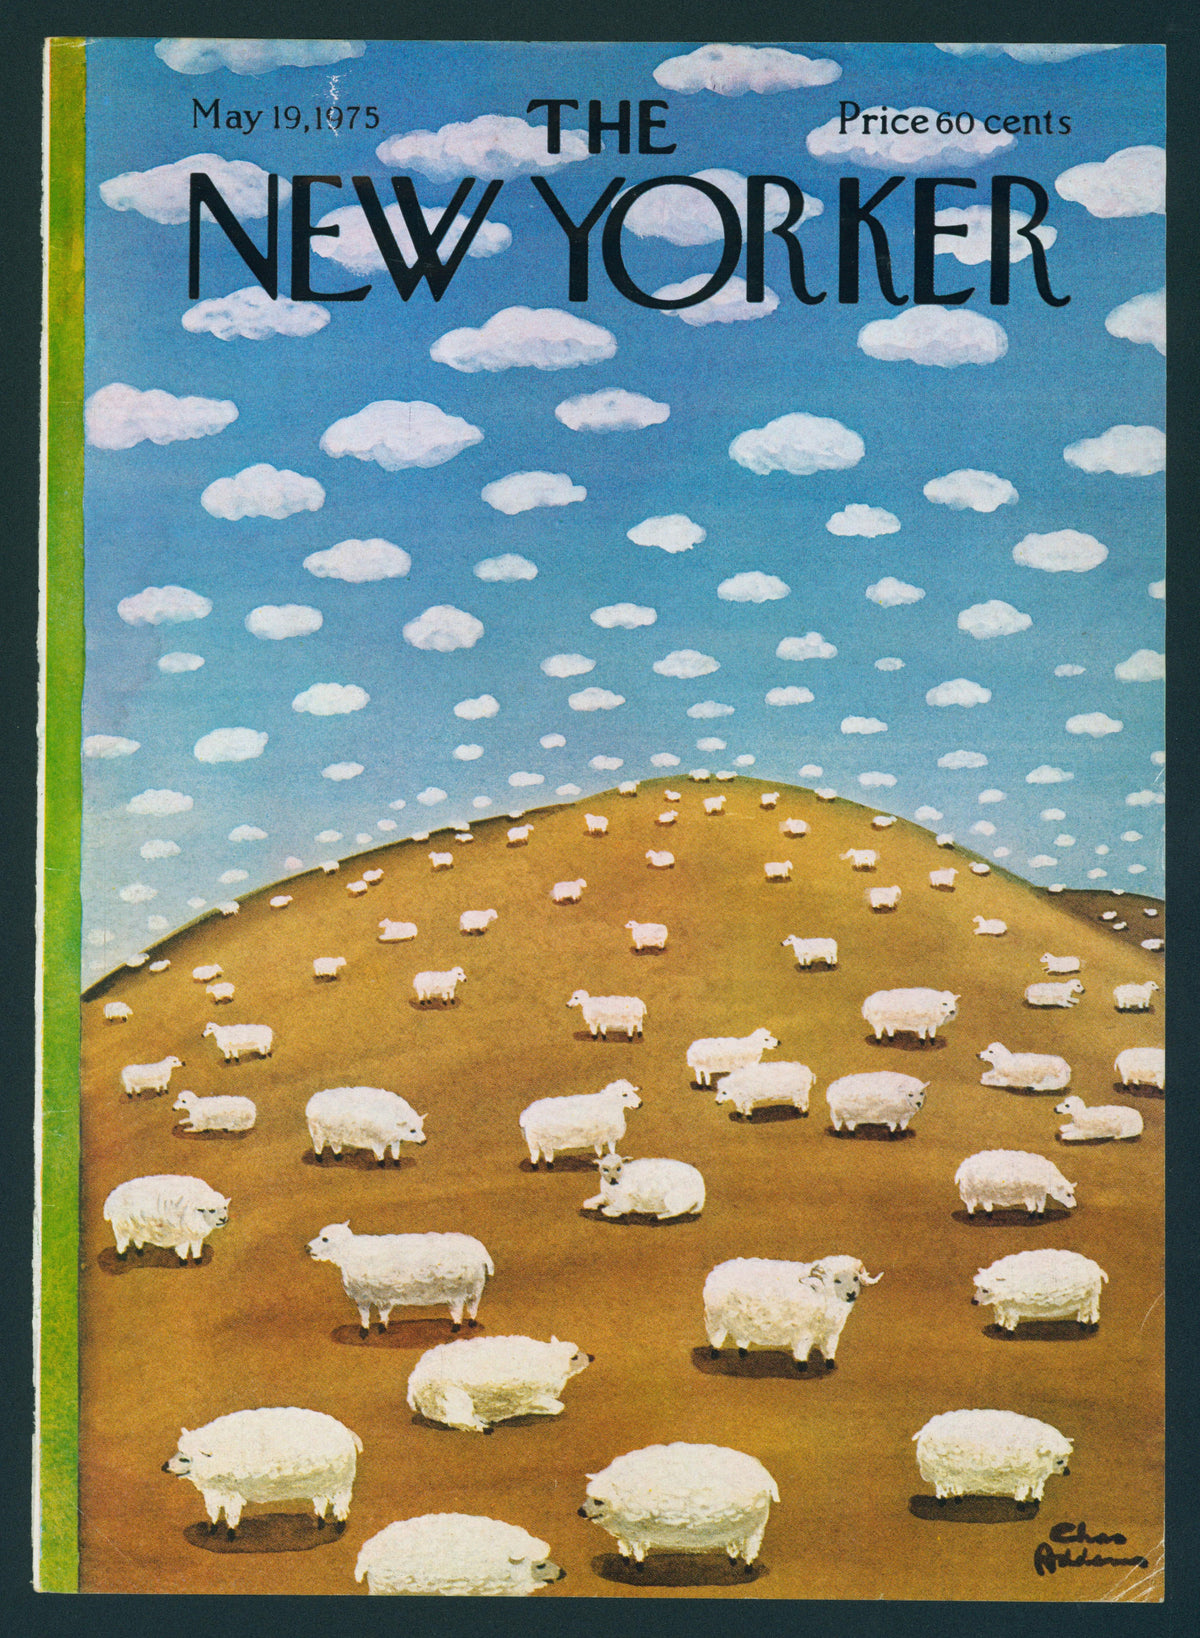 Counting Sheep- The New Yorker - Authentic Vintage Antique Print